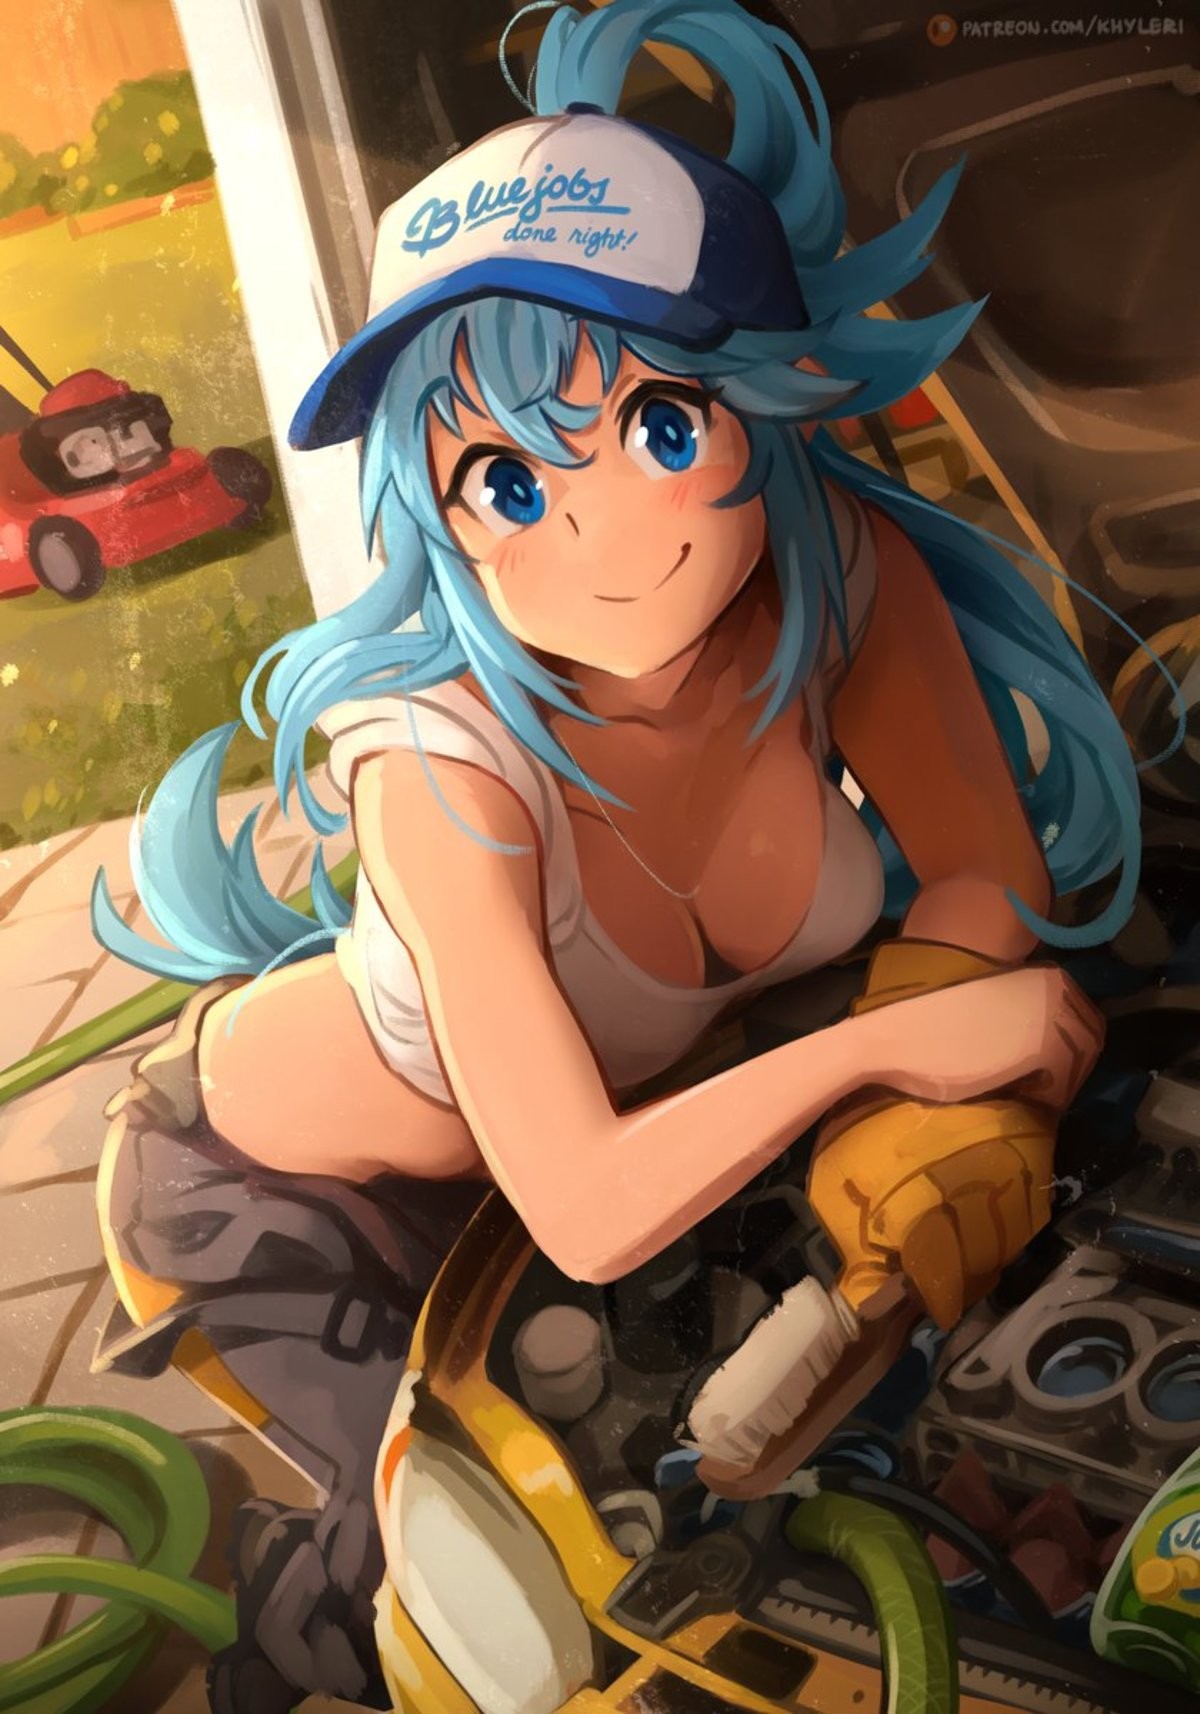 Daily Aqua - 1129: "Fixes" your car. join list: DailySplosion (826 subs)Mention History Source: .. Same thing I said last time I saw this, I wouldn't trust that useless bundle of meat within 10 feet of my car, let alone near any of the fluids.